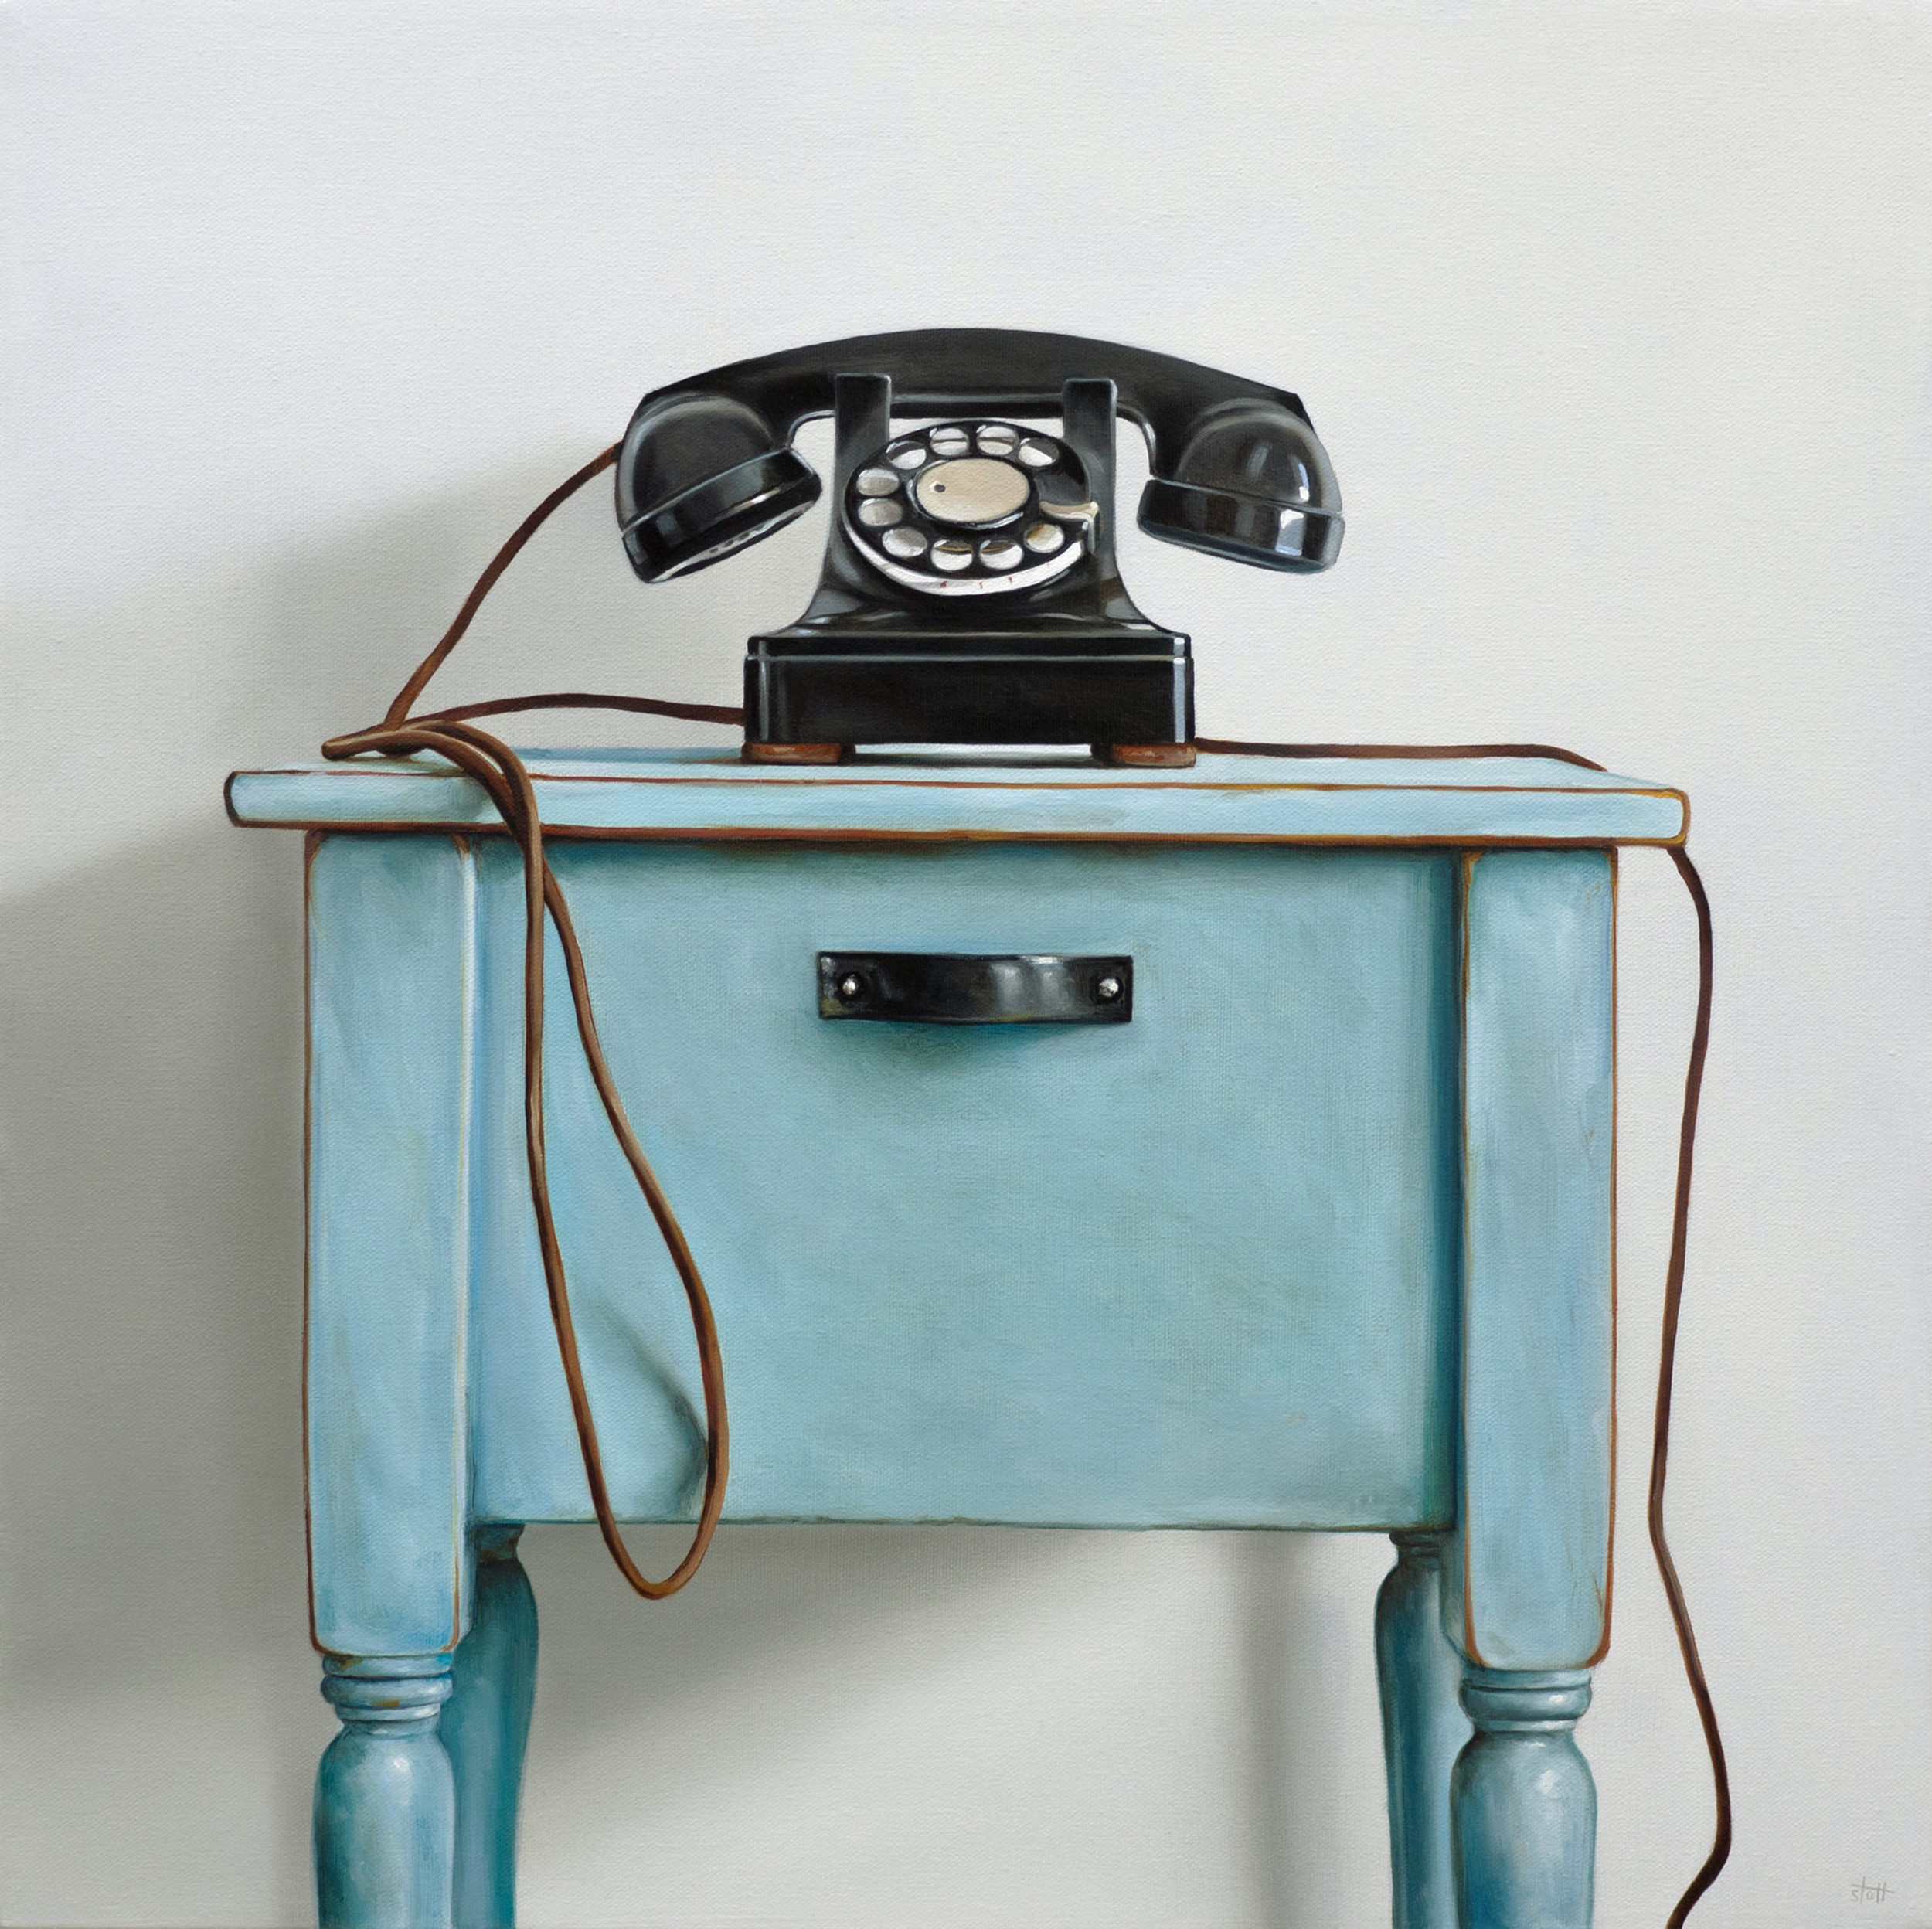 Rotary Telephone & Blue Table by Christopher Stott